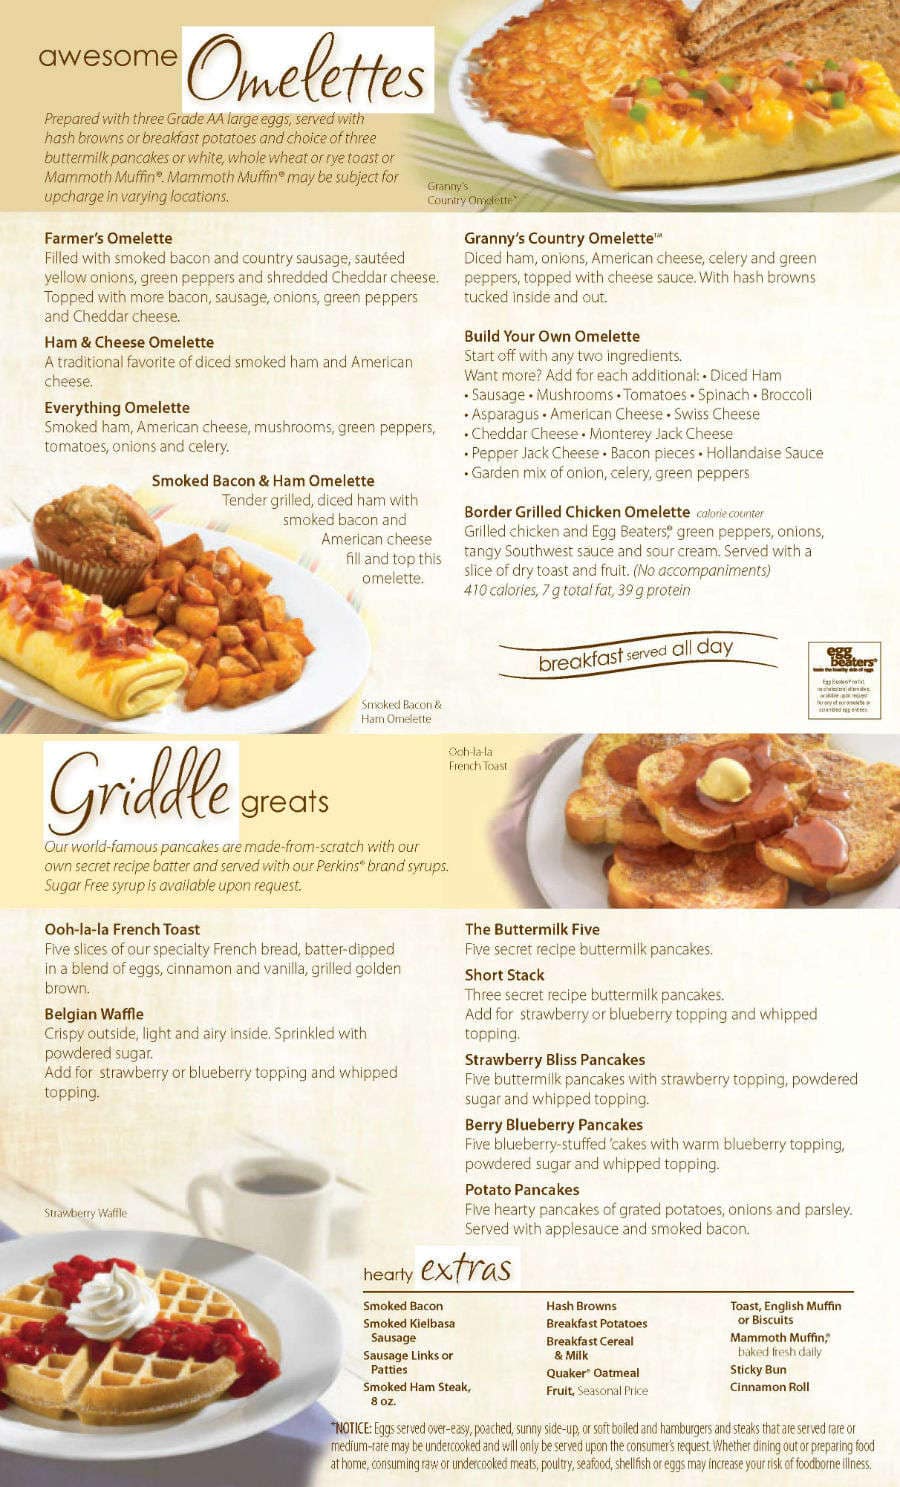 Perkins Menu And Prices 2020 All information about healthy recipes